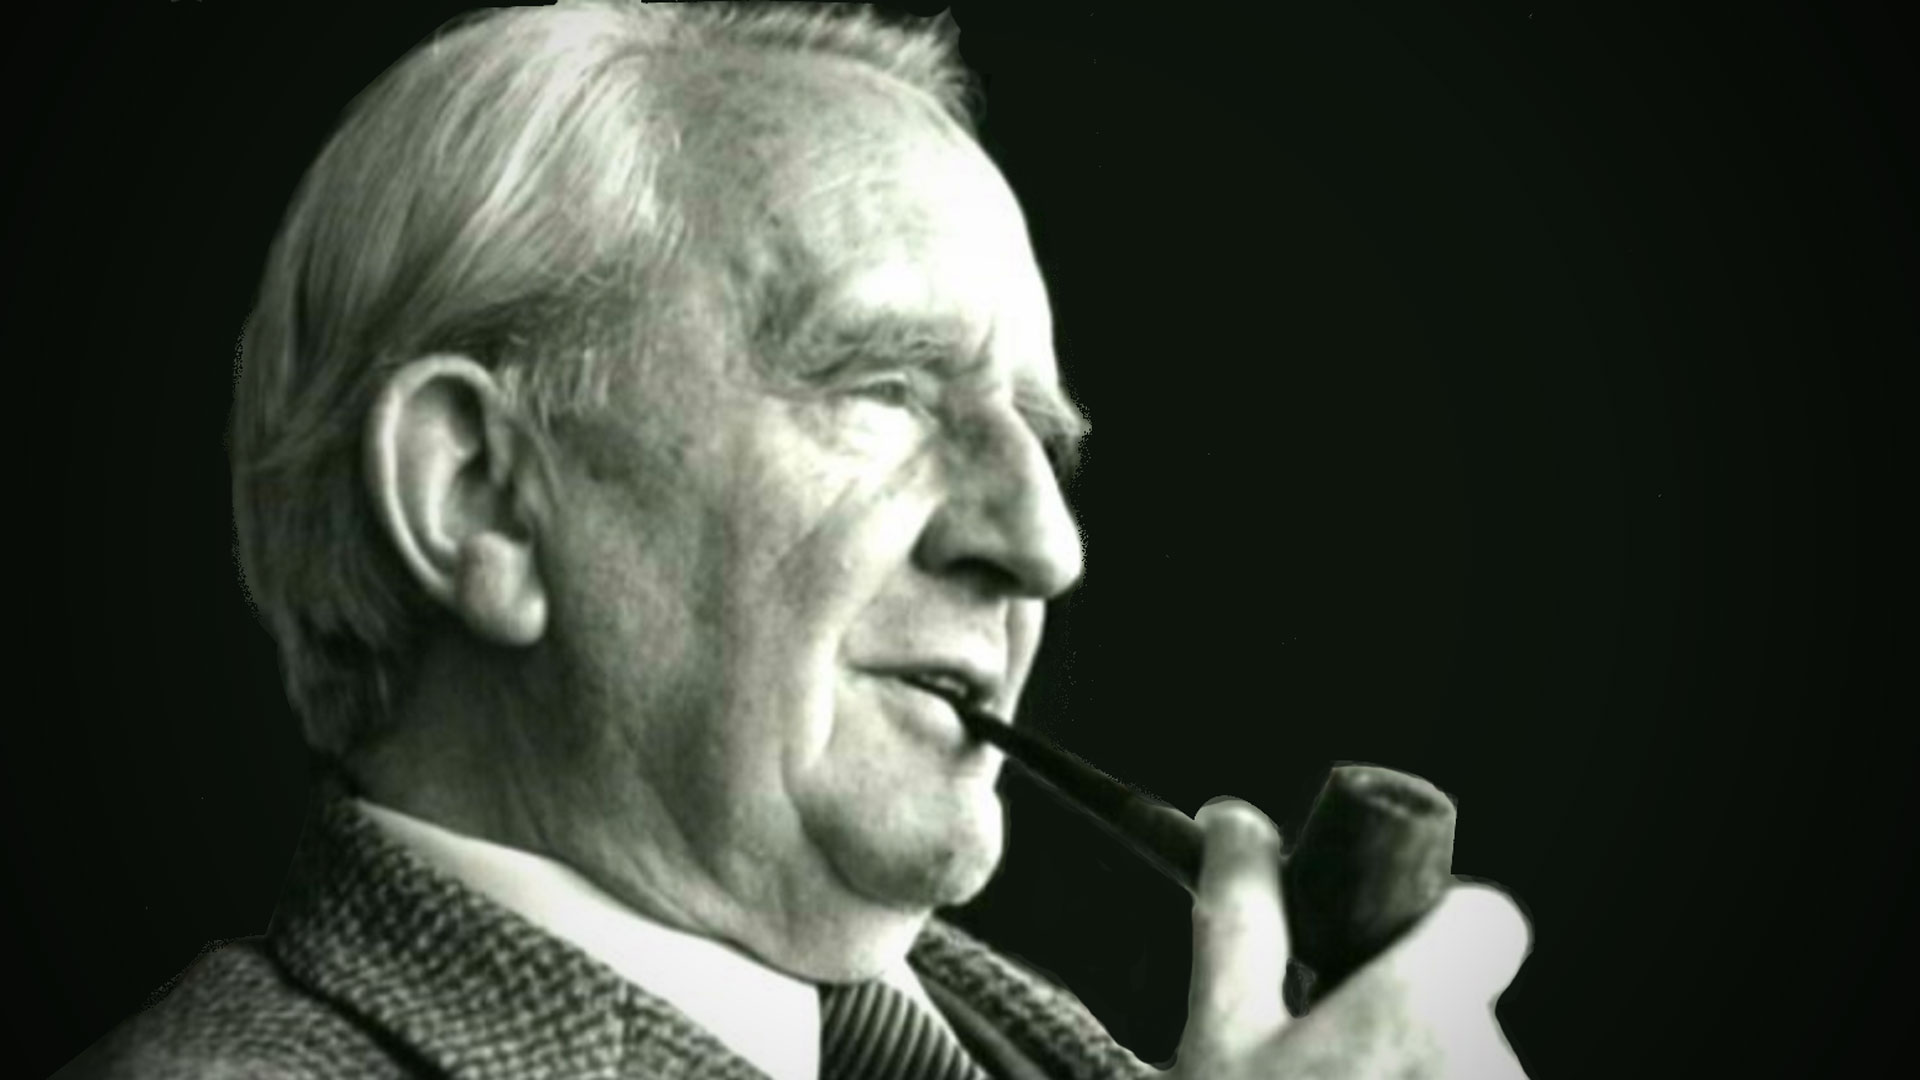 the-nazis-wanted-to-know-if-jrr-tolkien-was-aryan-tolkien-wasn-t